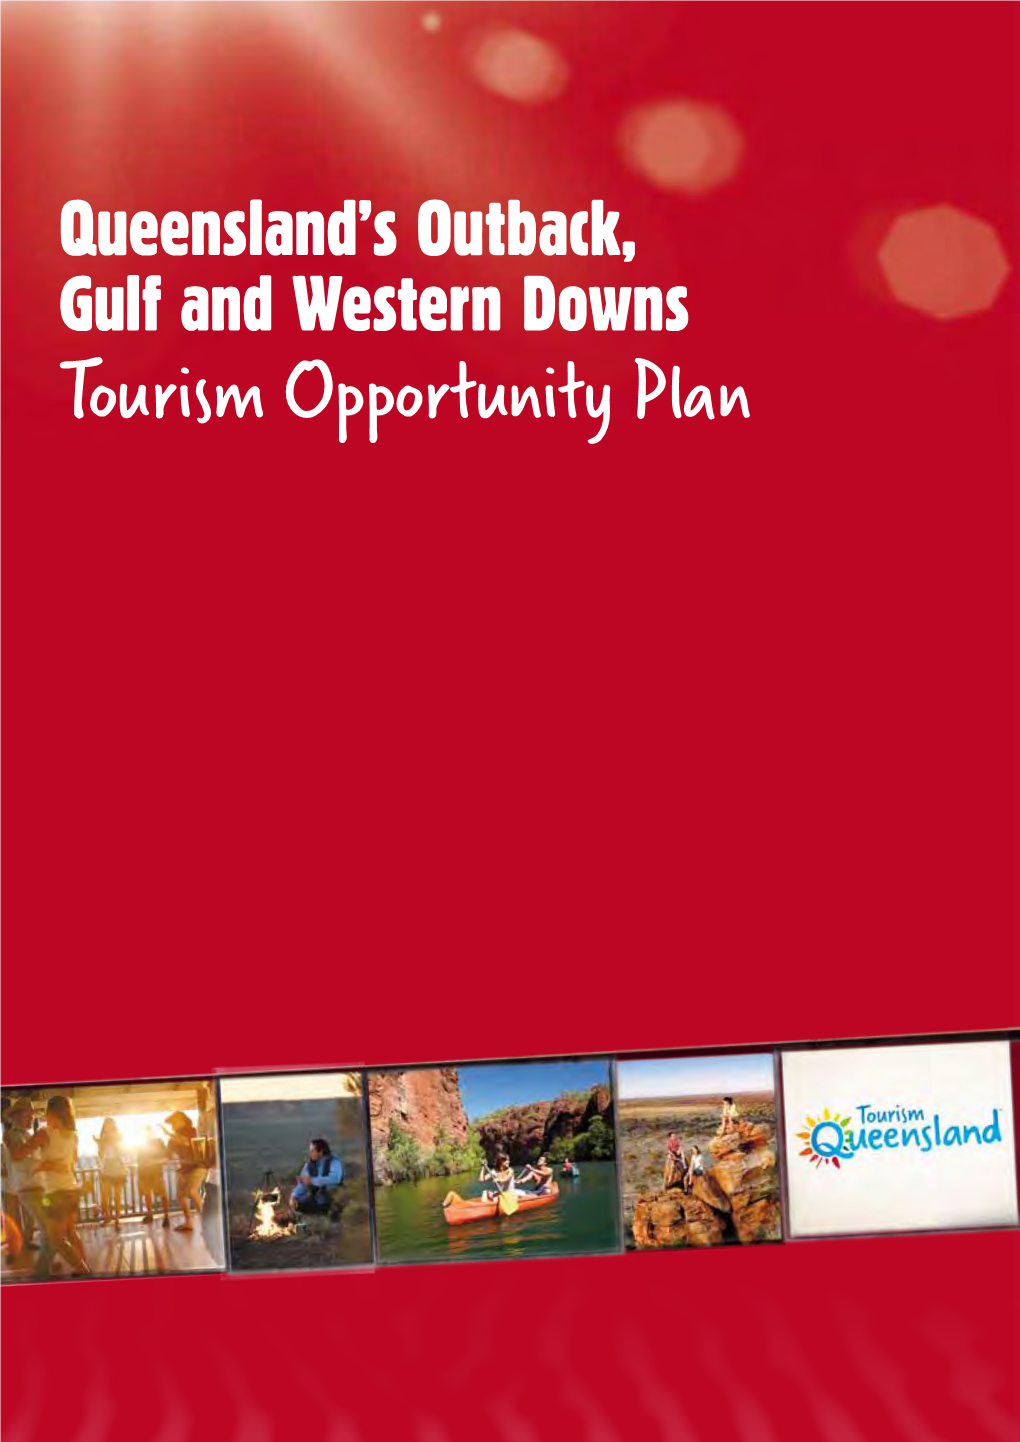 Tourism Opportunity Plan